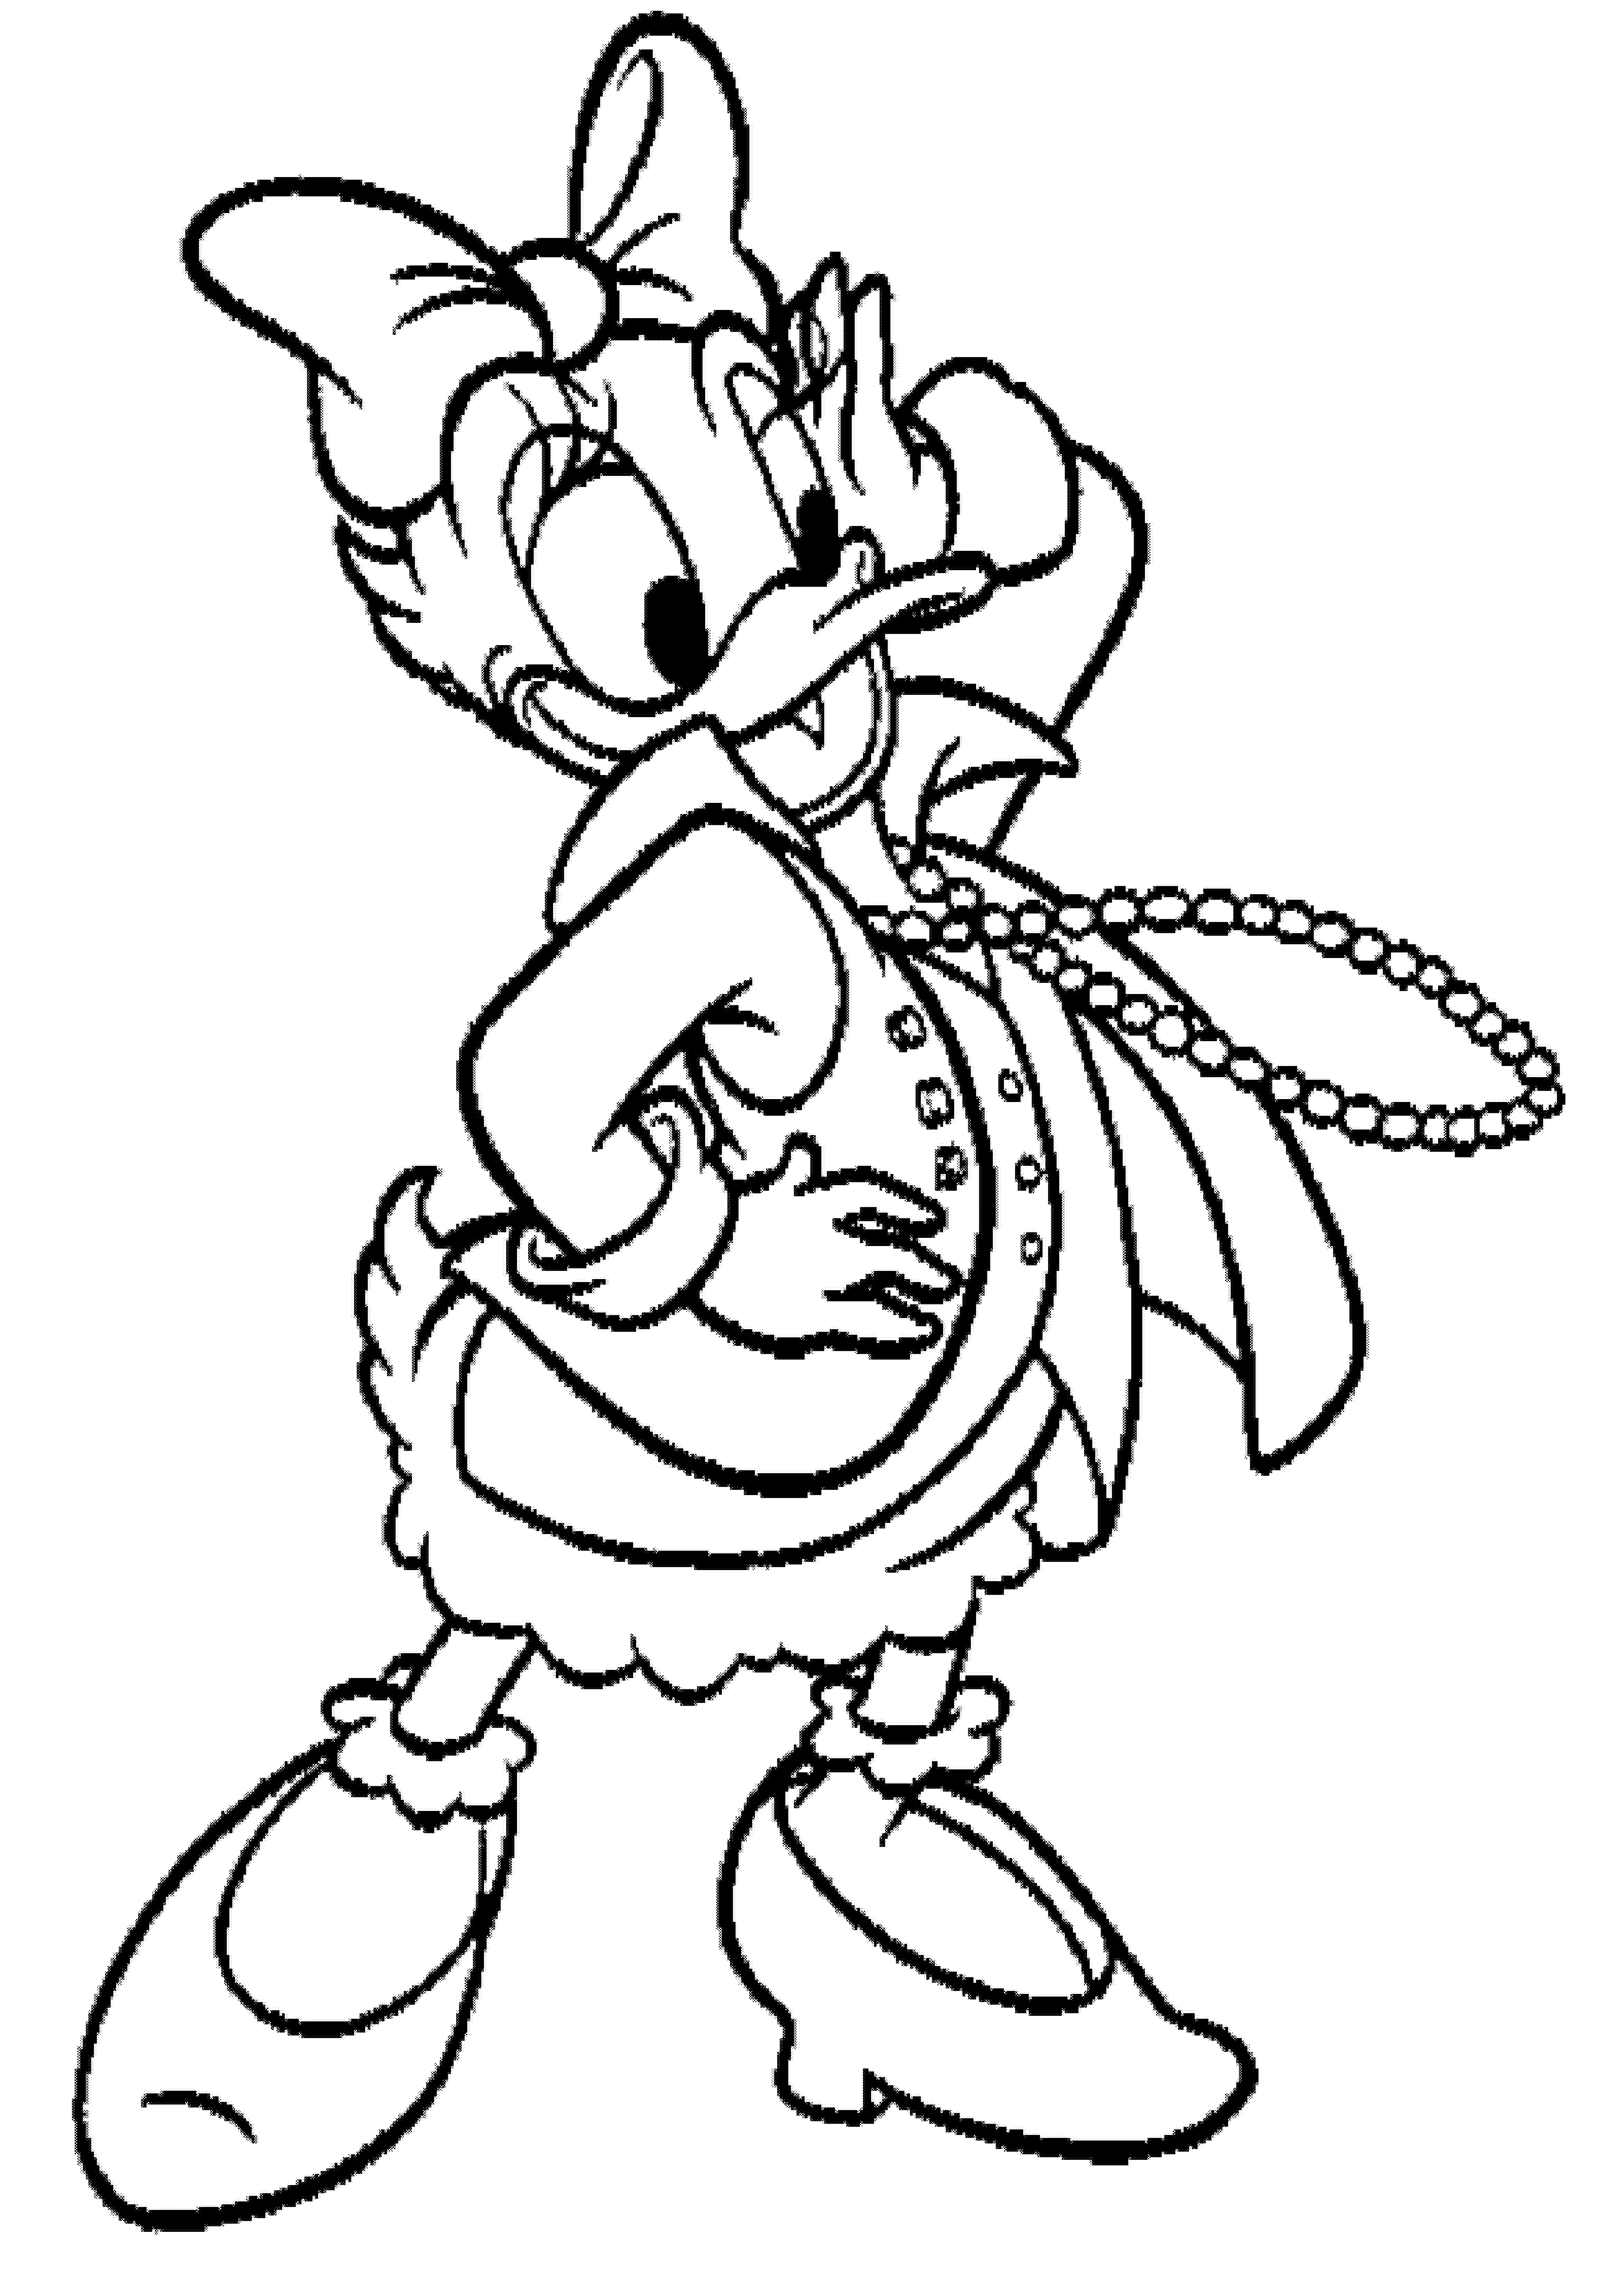 Daisy duck coloring pages to download and print for free